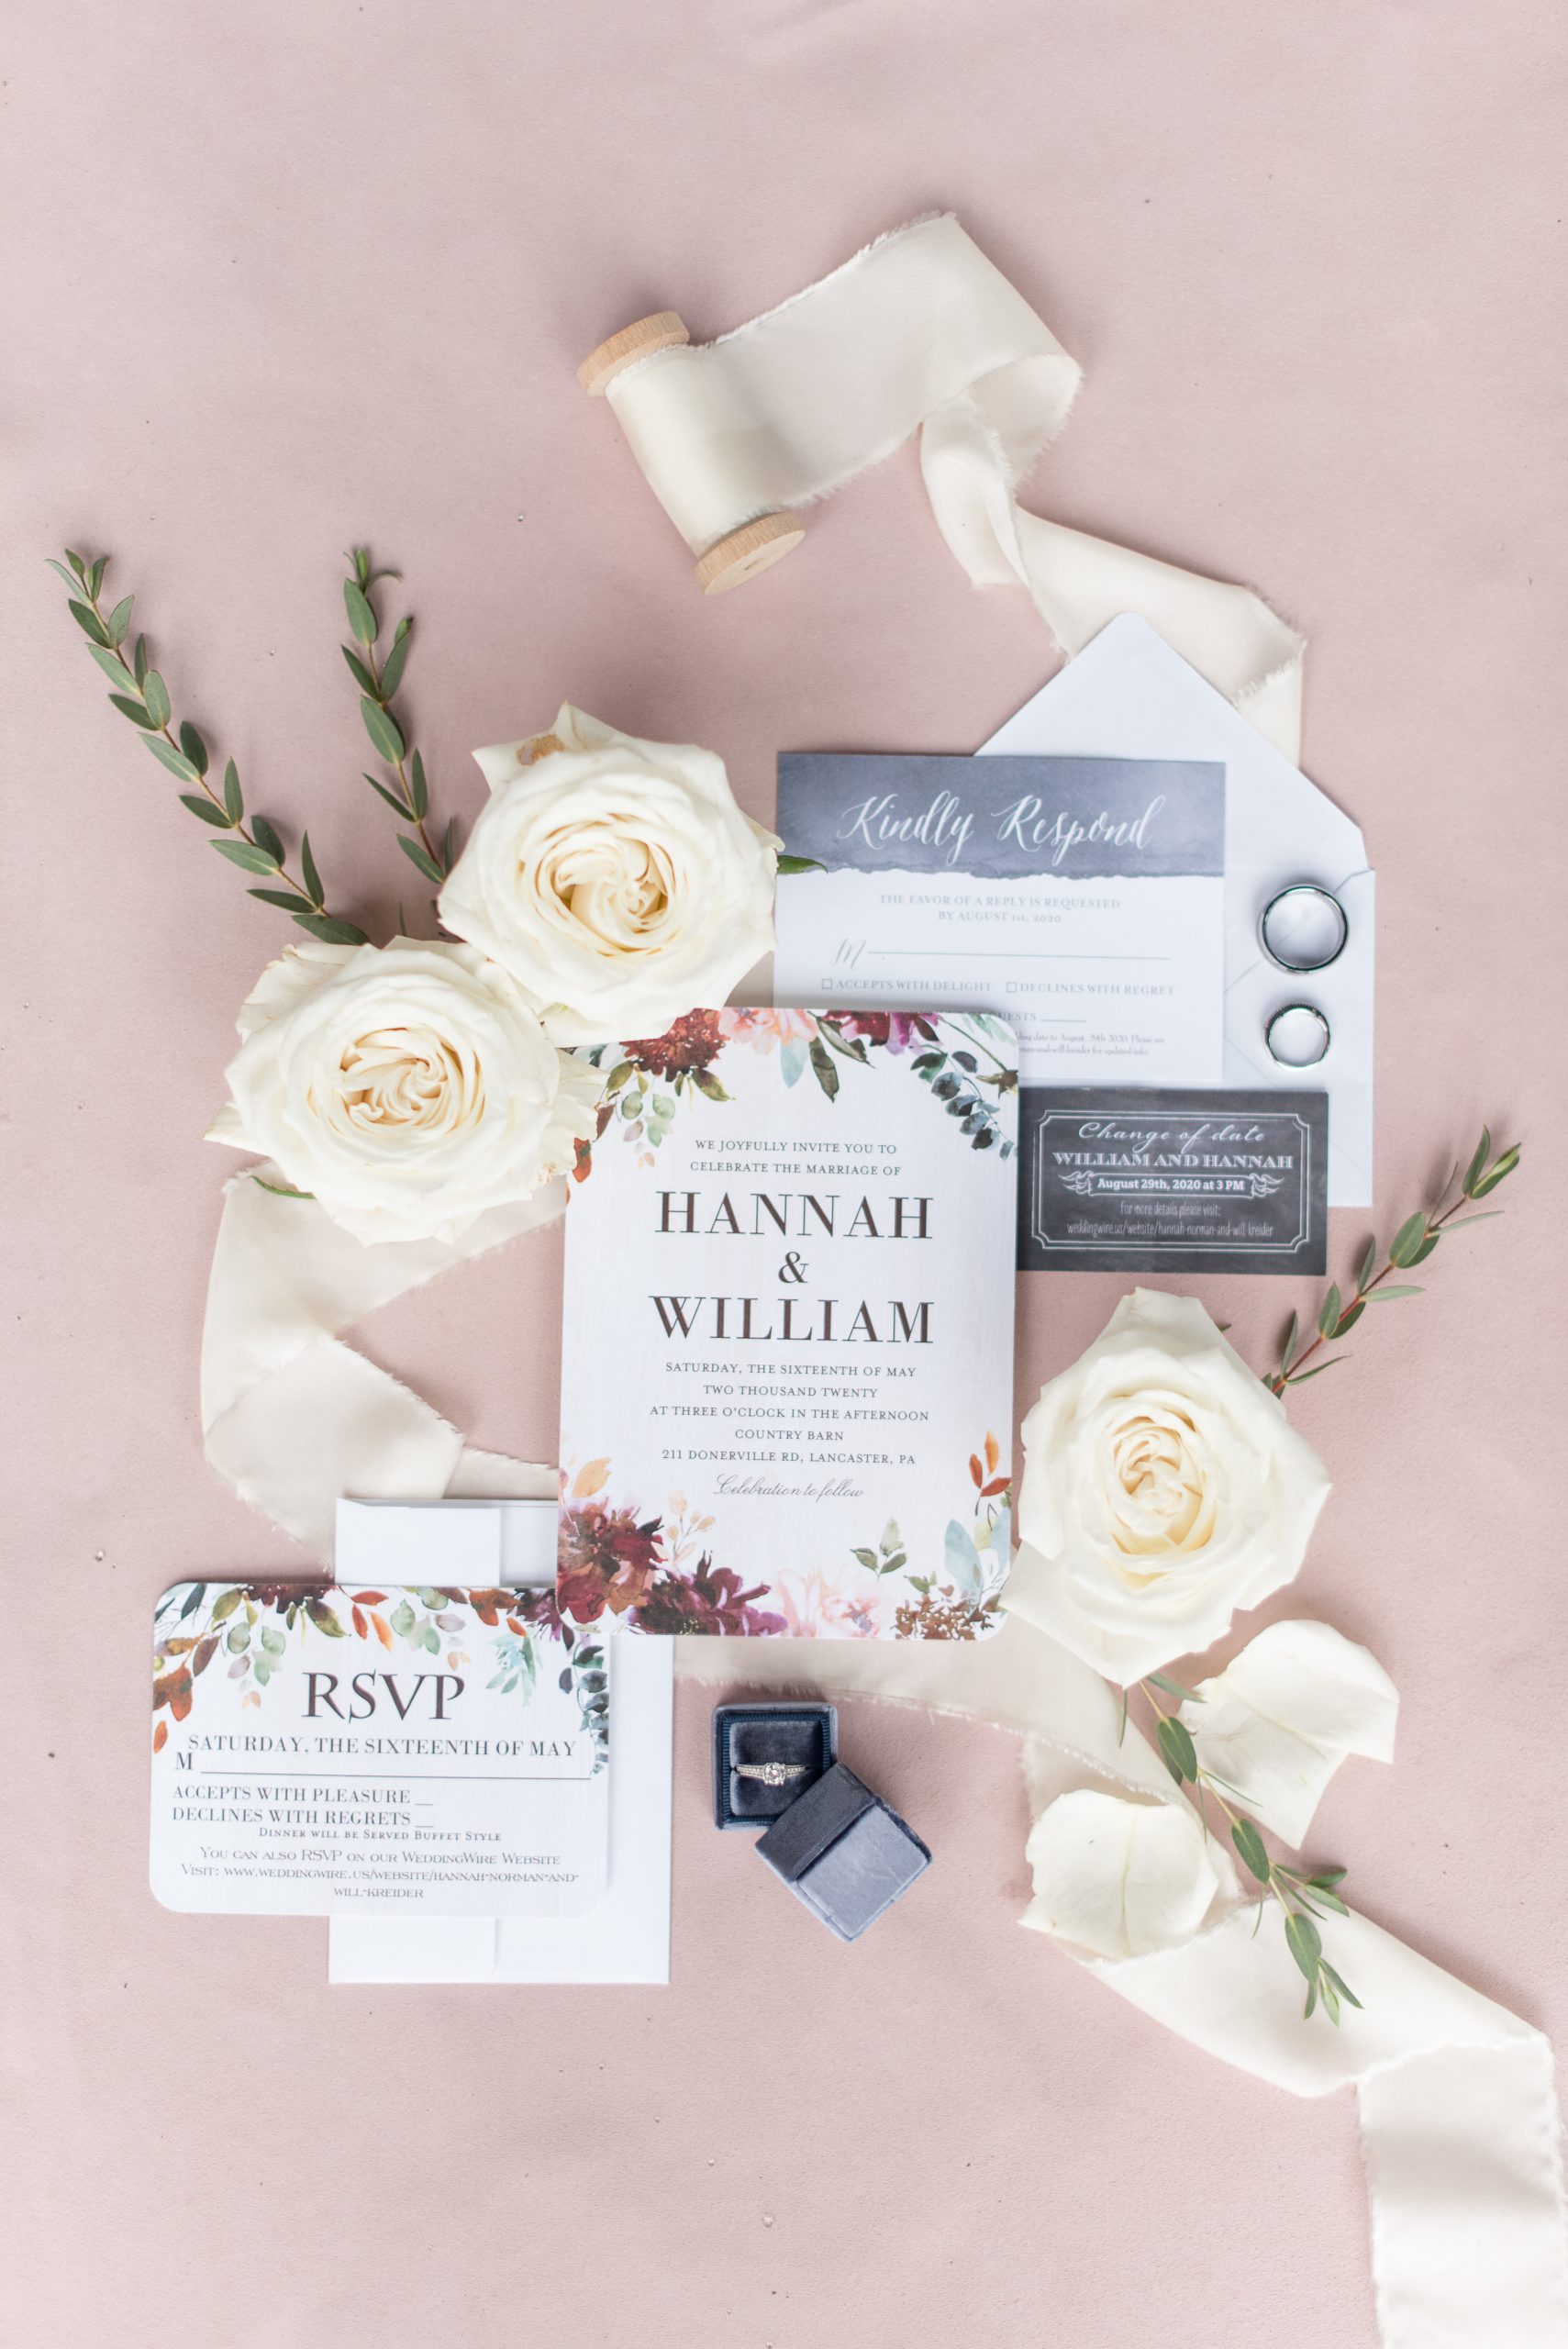 wedding details flat lay of invitation suite, white florals, and wedding rings on suede background